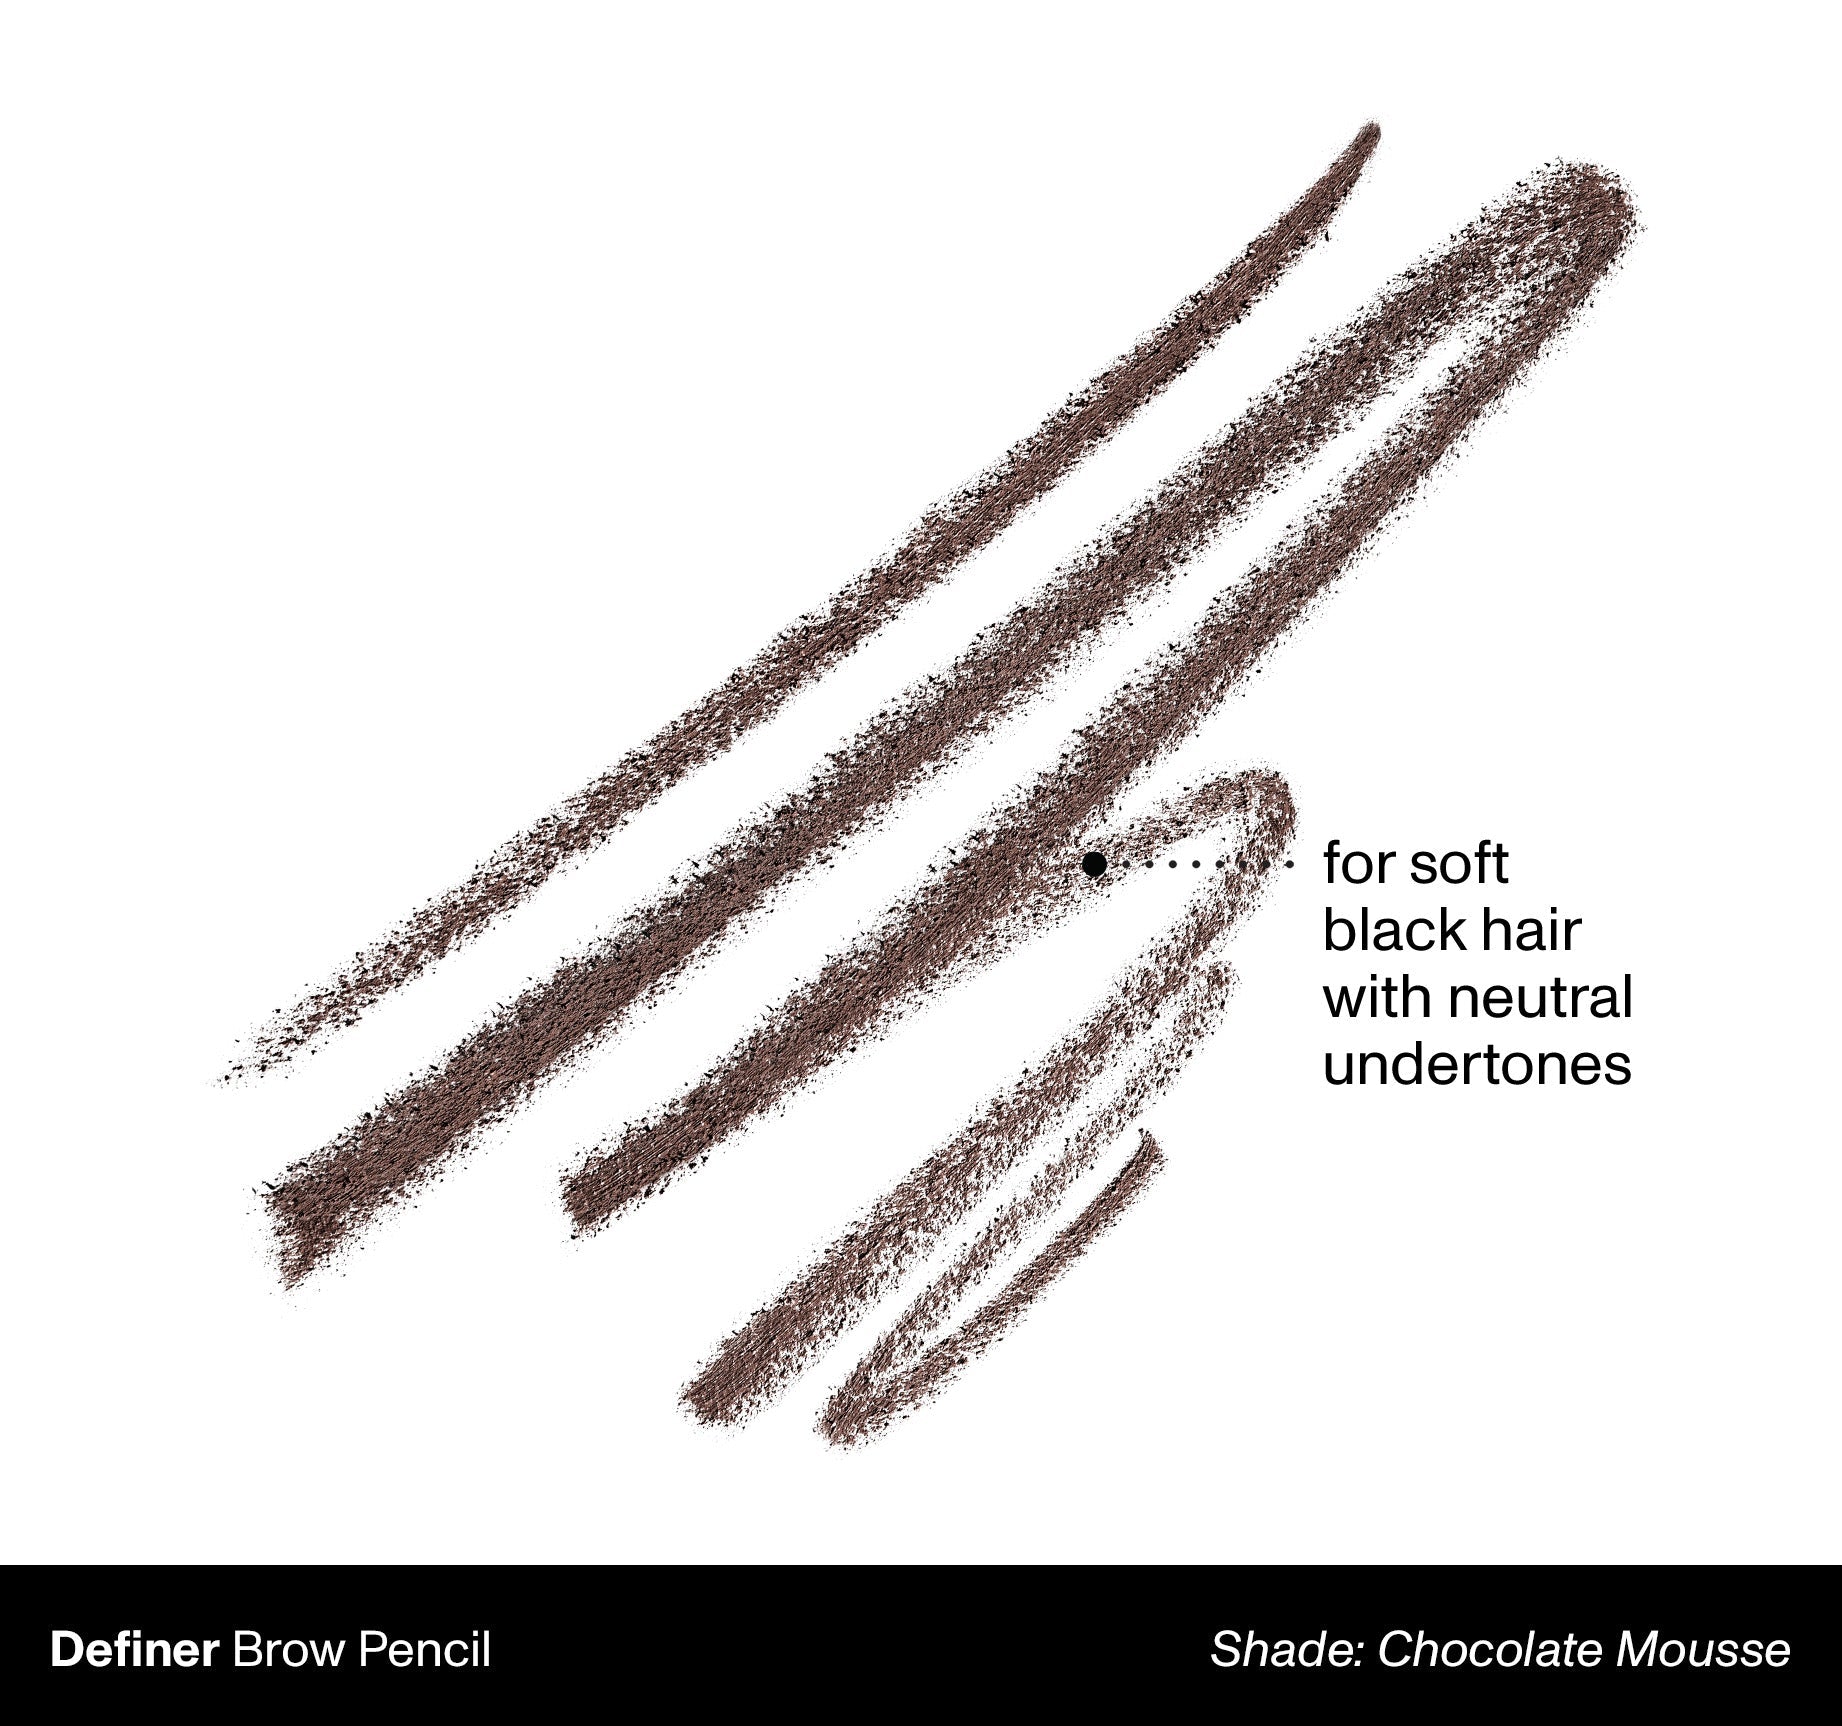 Definer Dual-Ended Brow Pencil & Spoolie - Chocolate Mousse - Image 2